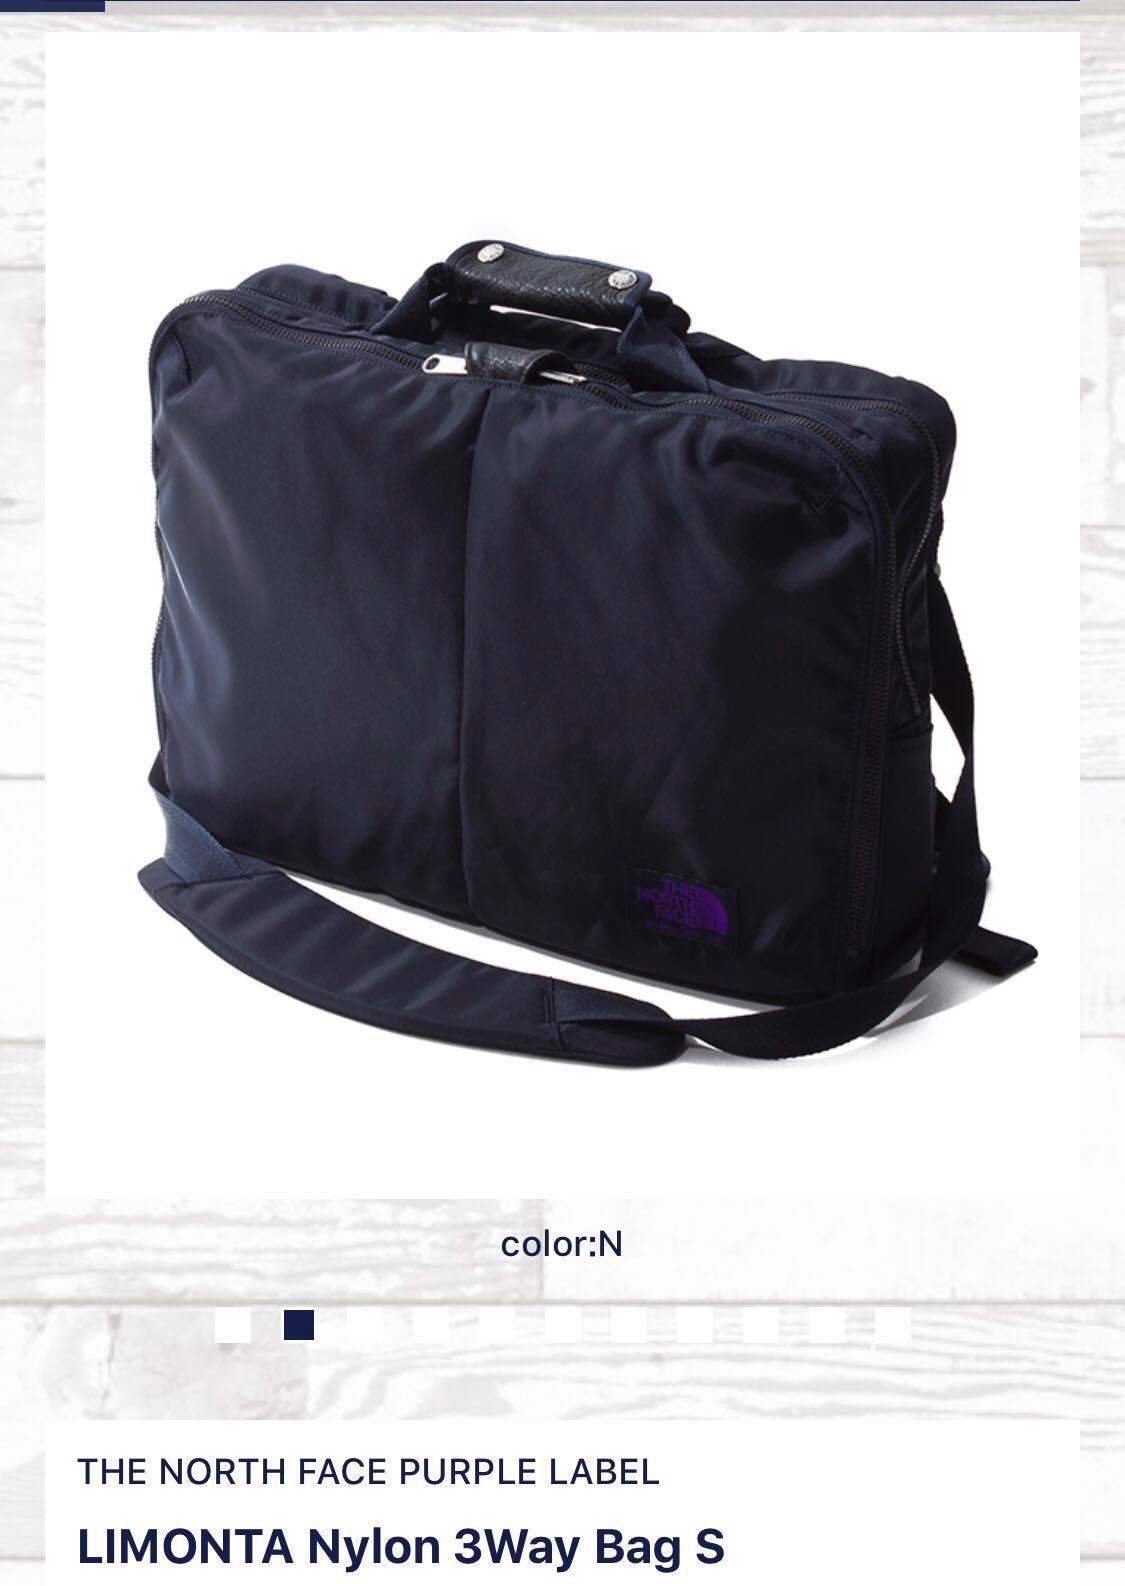 The North Face Purple Label 3way Bag Online Shopping For Women Men Kids Fashion Lifestyle Free Delivery Returns